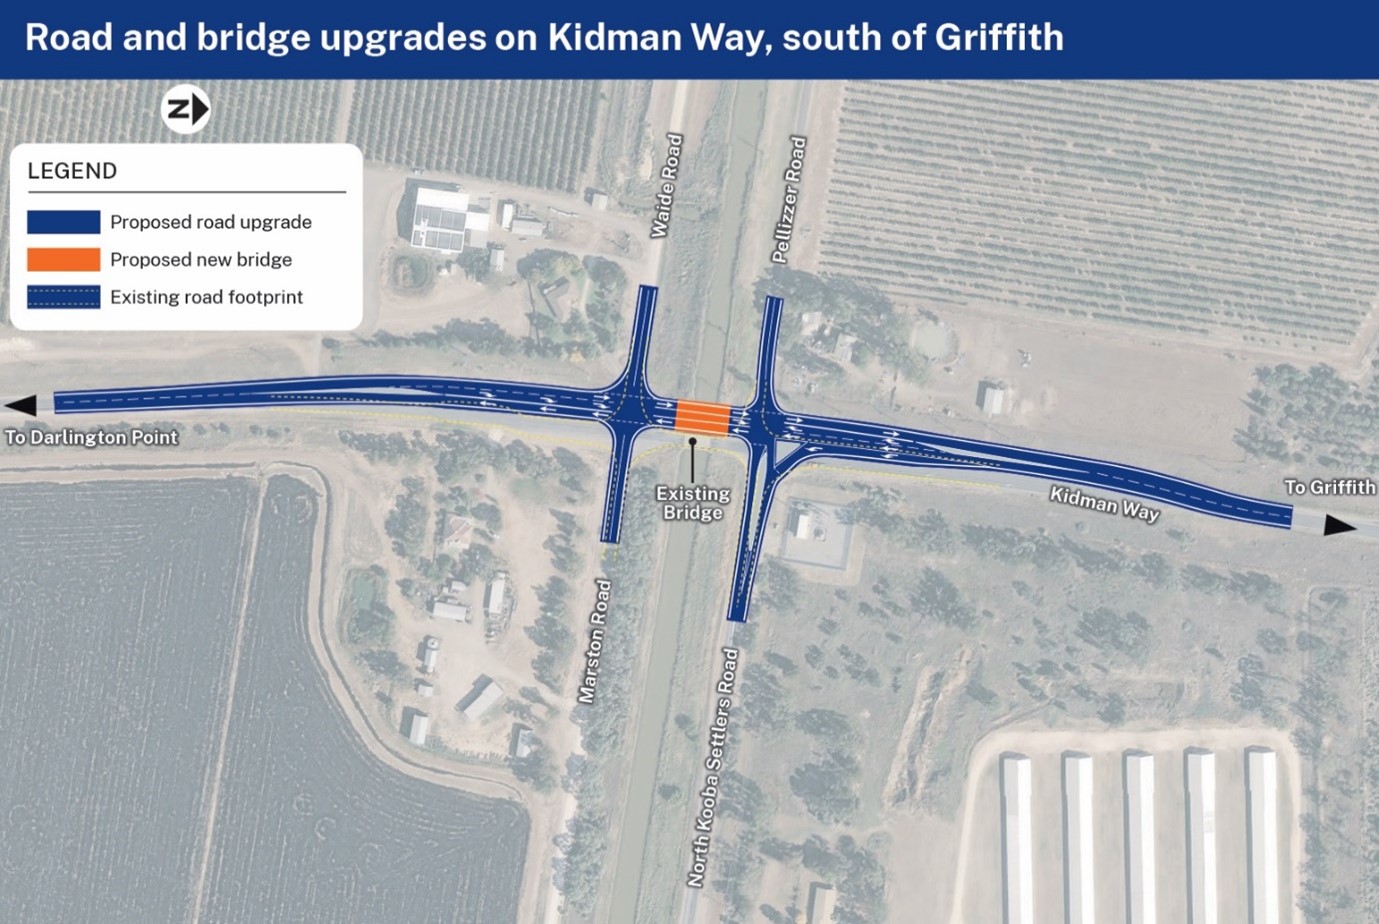 Road and bridge upgrades on Kidman Way, south of Griffith